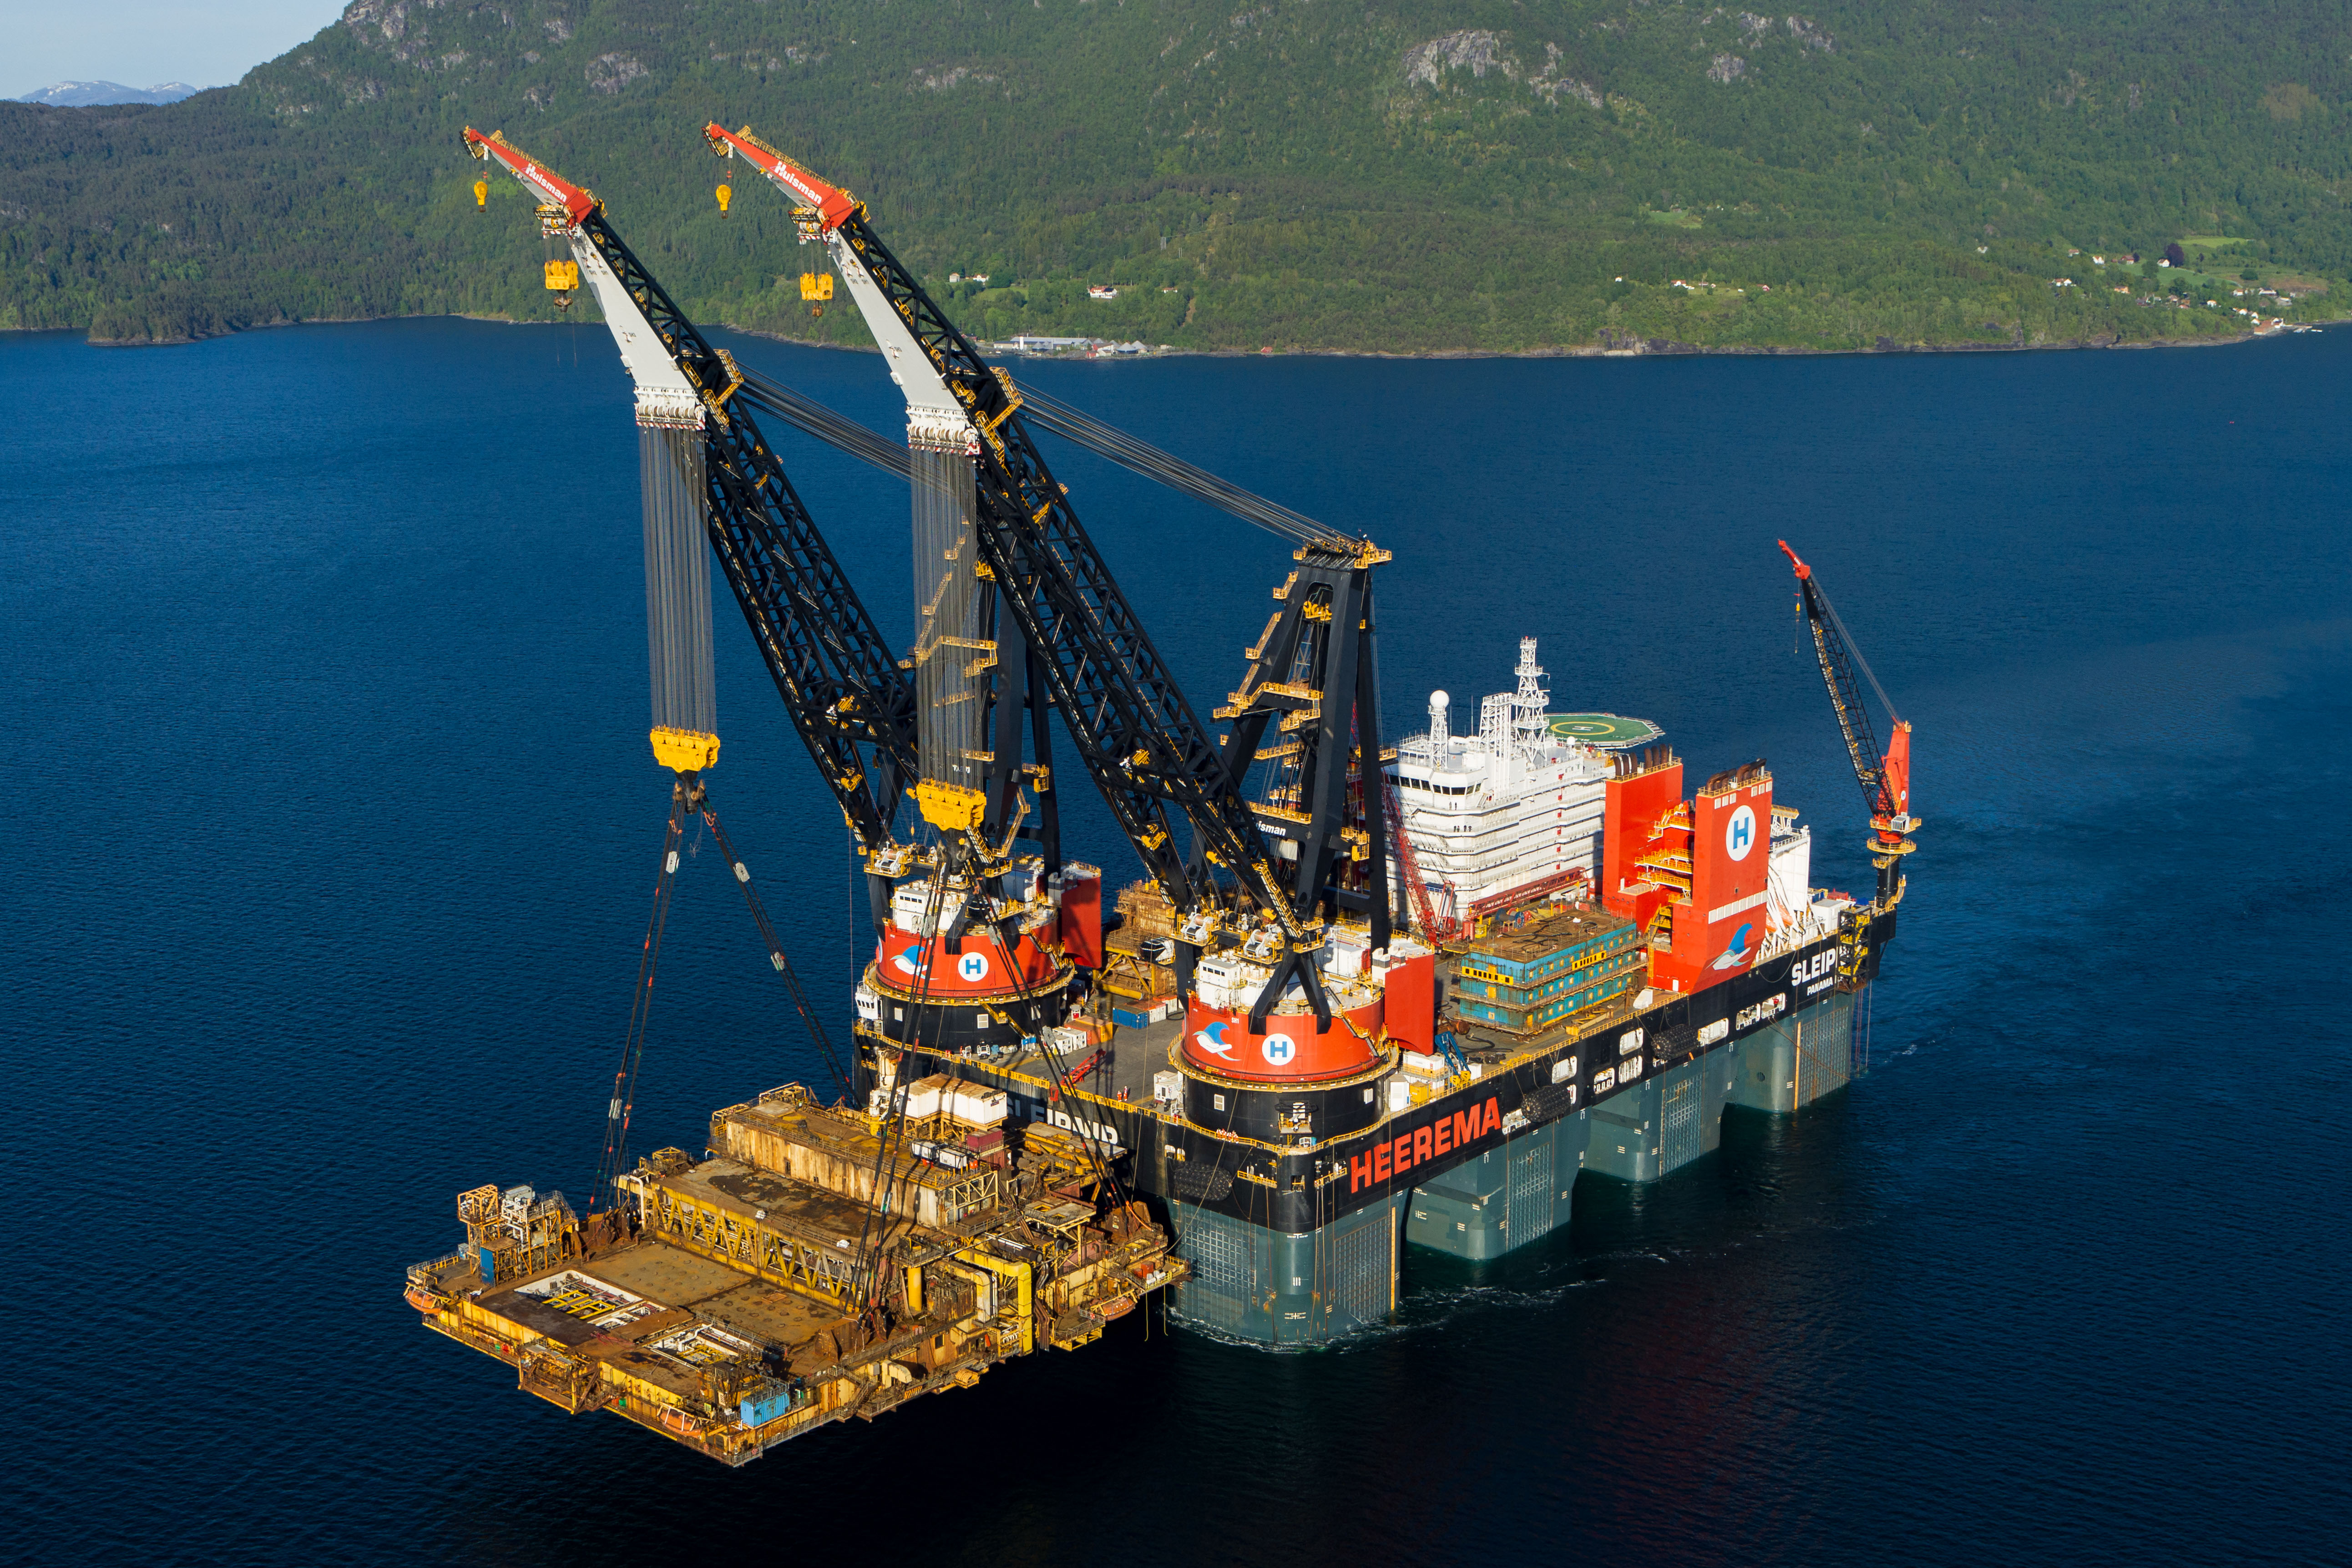 Topsides removal a significant milestone in decommissioning of 